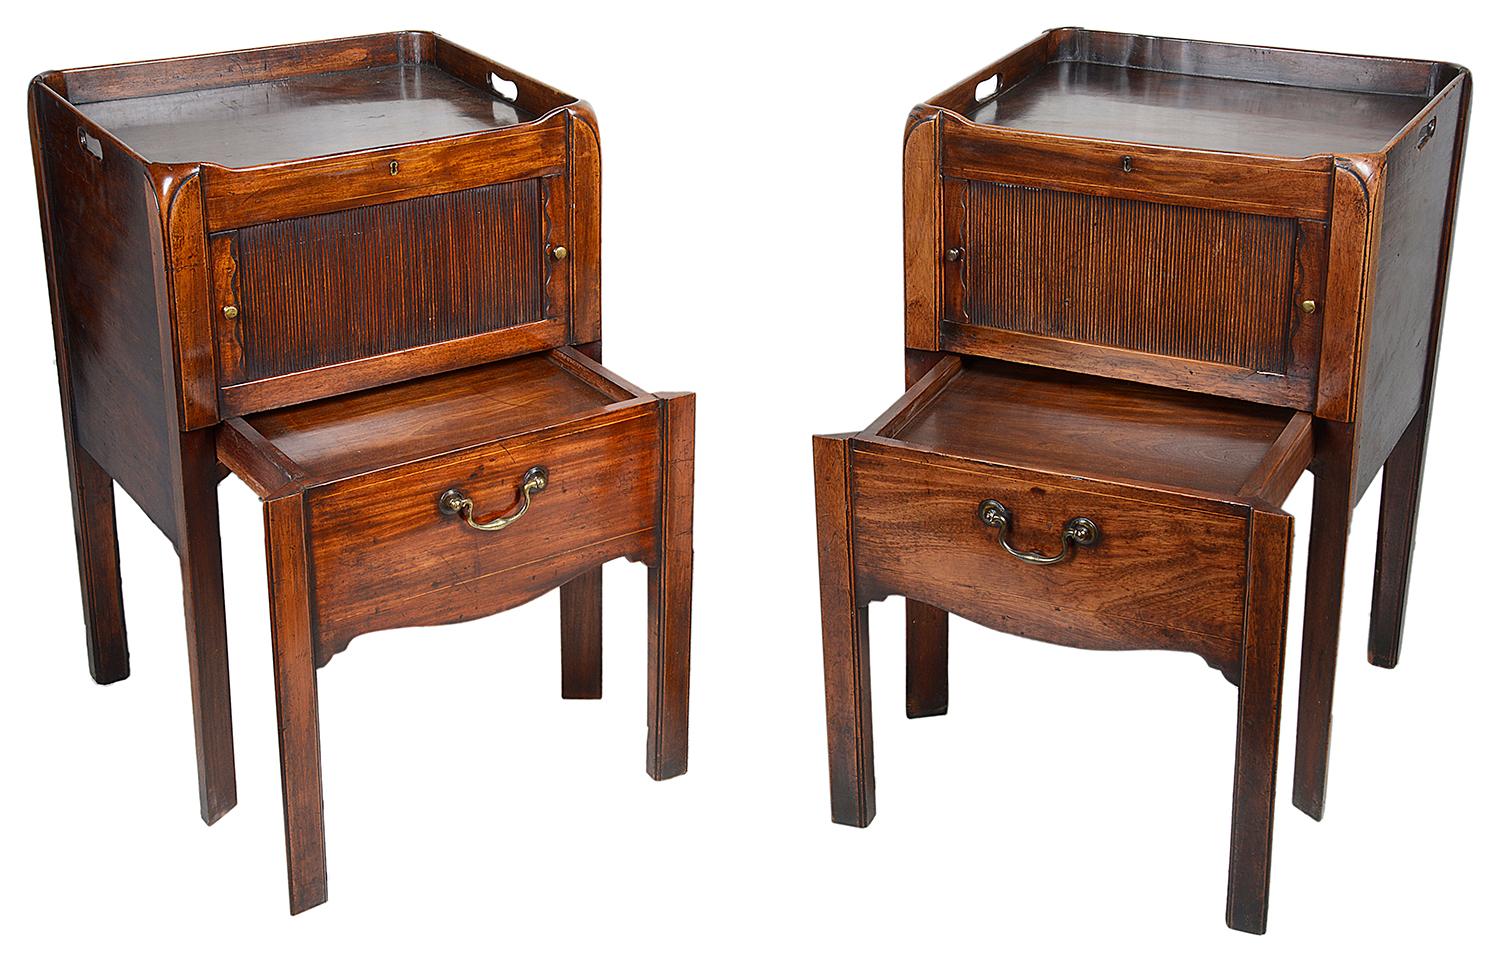 A good quality pair of Georgian period mahogany bedside commodes, each with tray tops, sliding tambour fronted compartments, sliding shelf sections on two legs with swan neck handles.